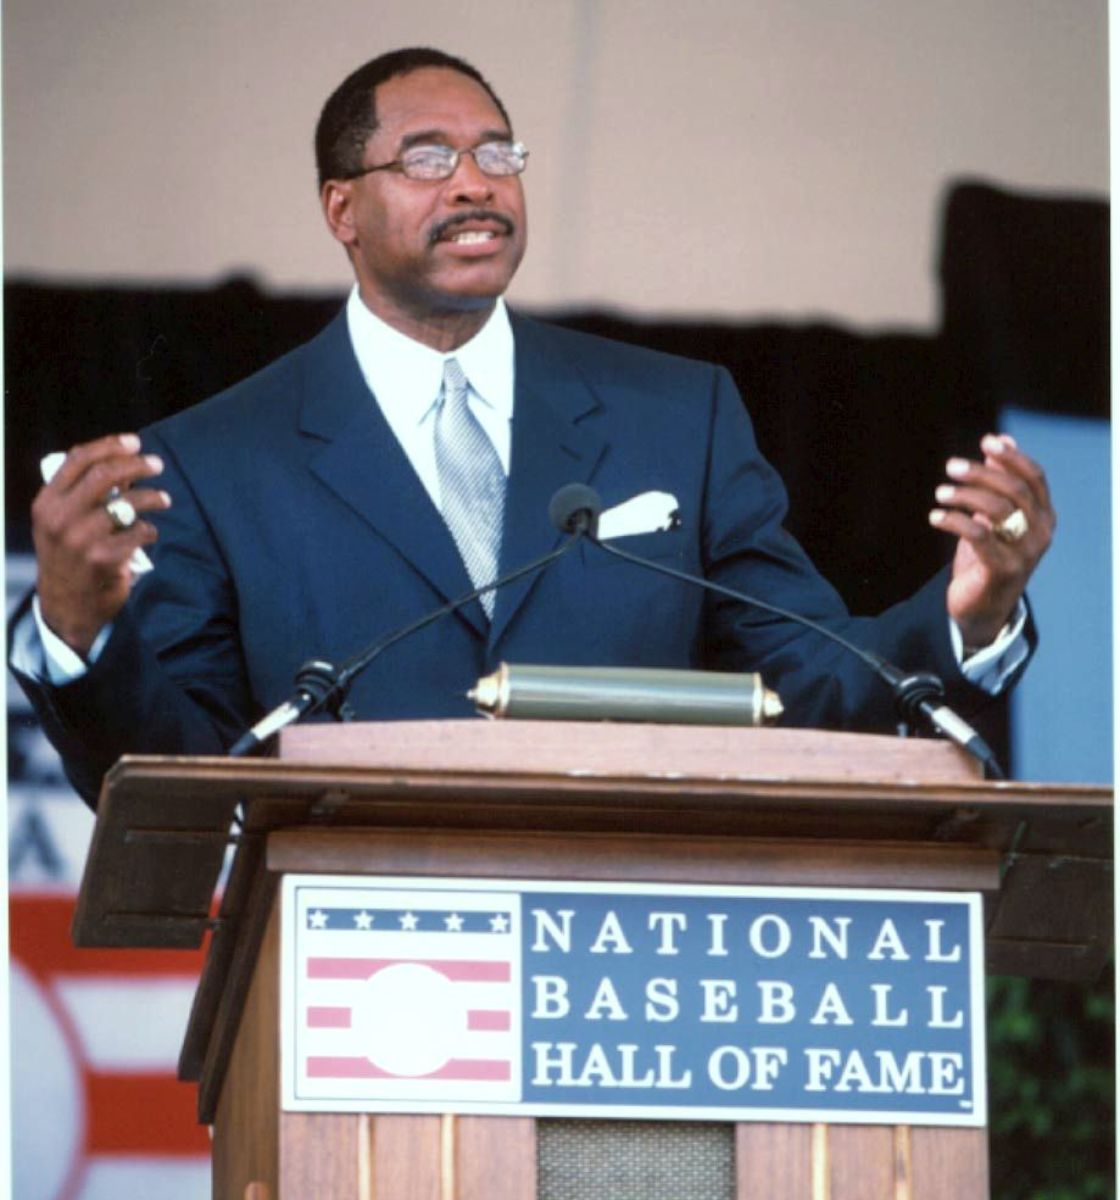 Hall of Famer Dave Winfield spent a season with the Cleveland Indians at the tail end of his career.